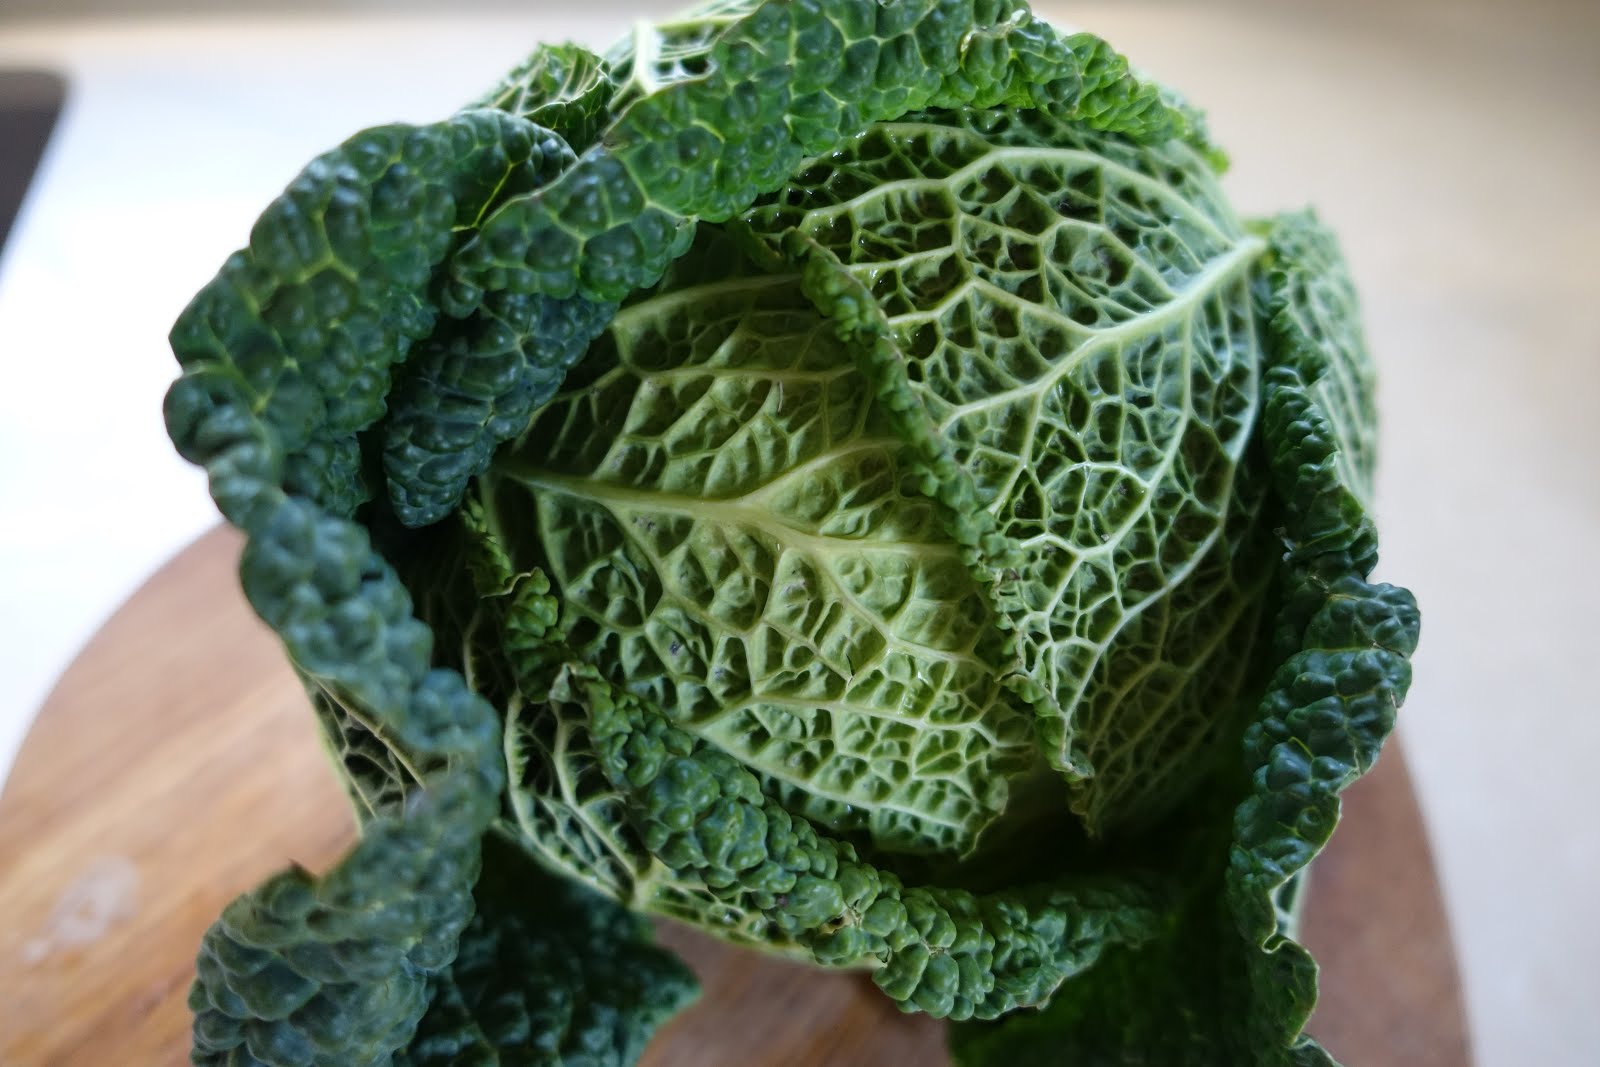 Blog Vegetable: The Savoy Cabbage